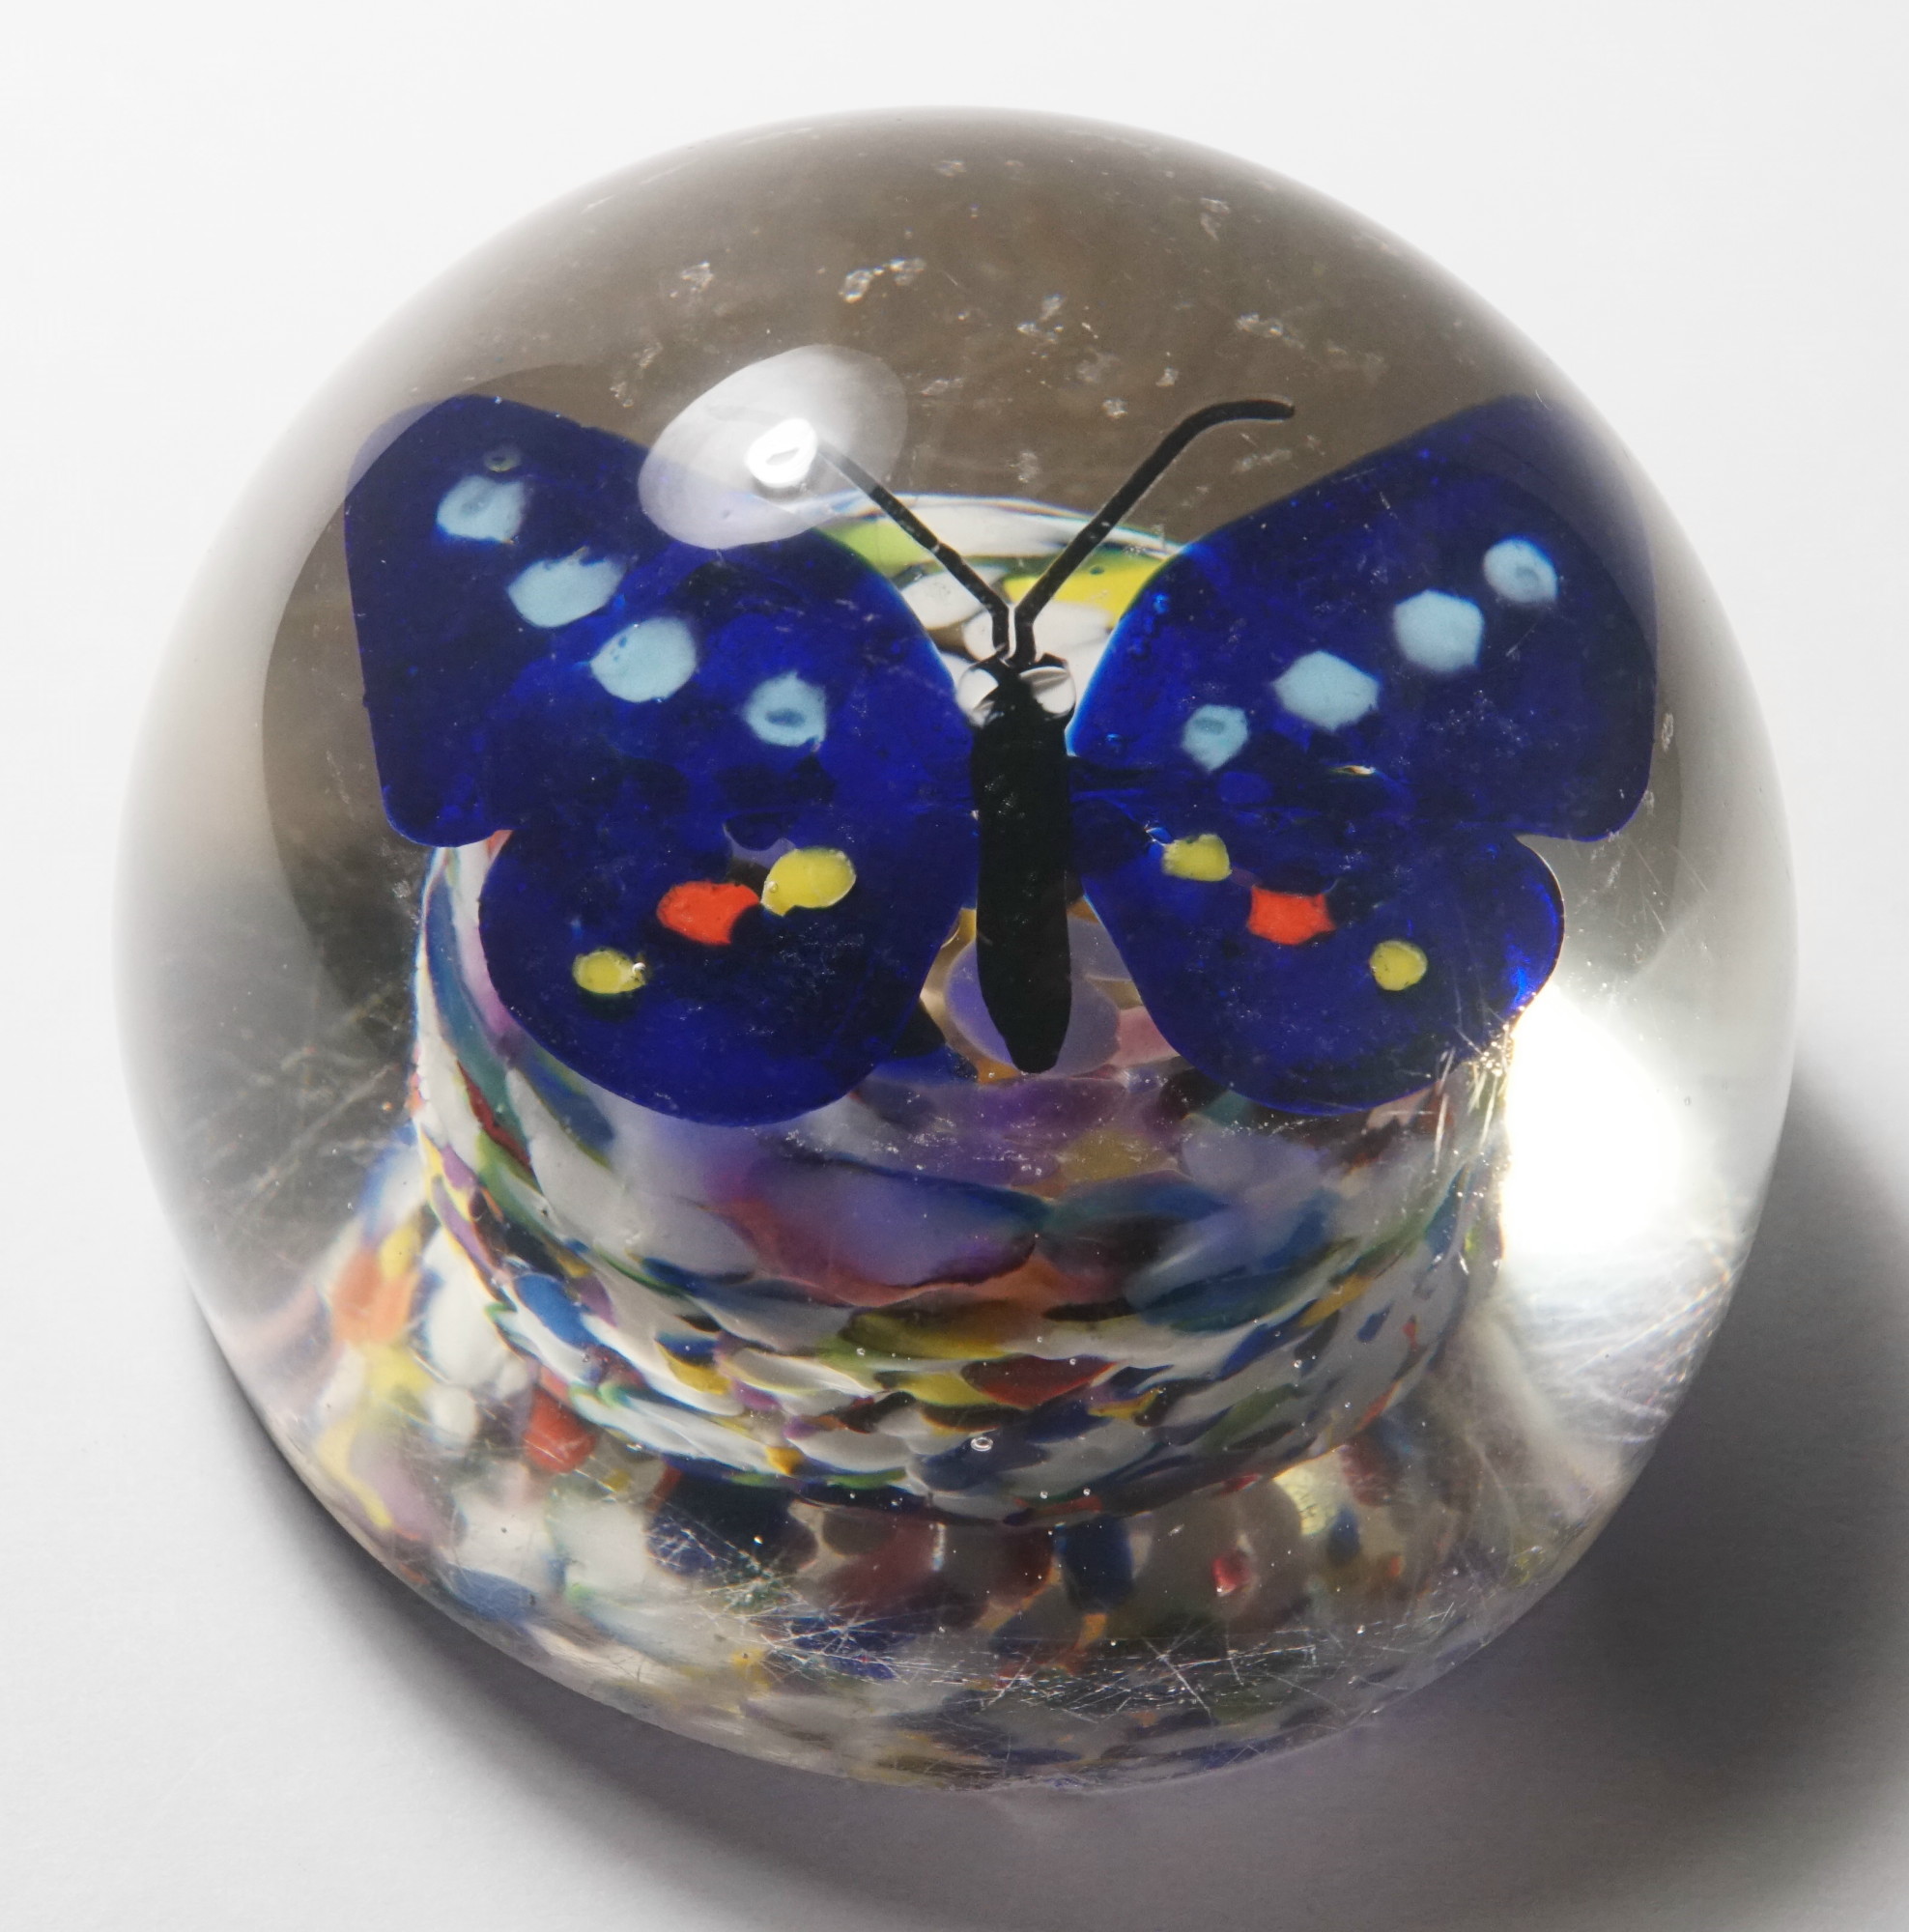 SUPERB BLUE BUTTERFLIES GLASS PAPERWEIGHT IN BOX HAND PAINTED MADE IN BRITAIN